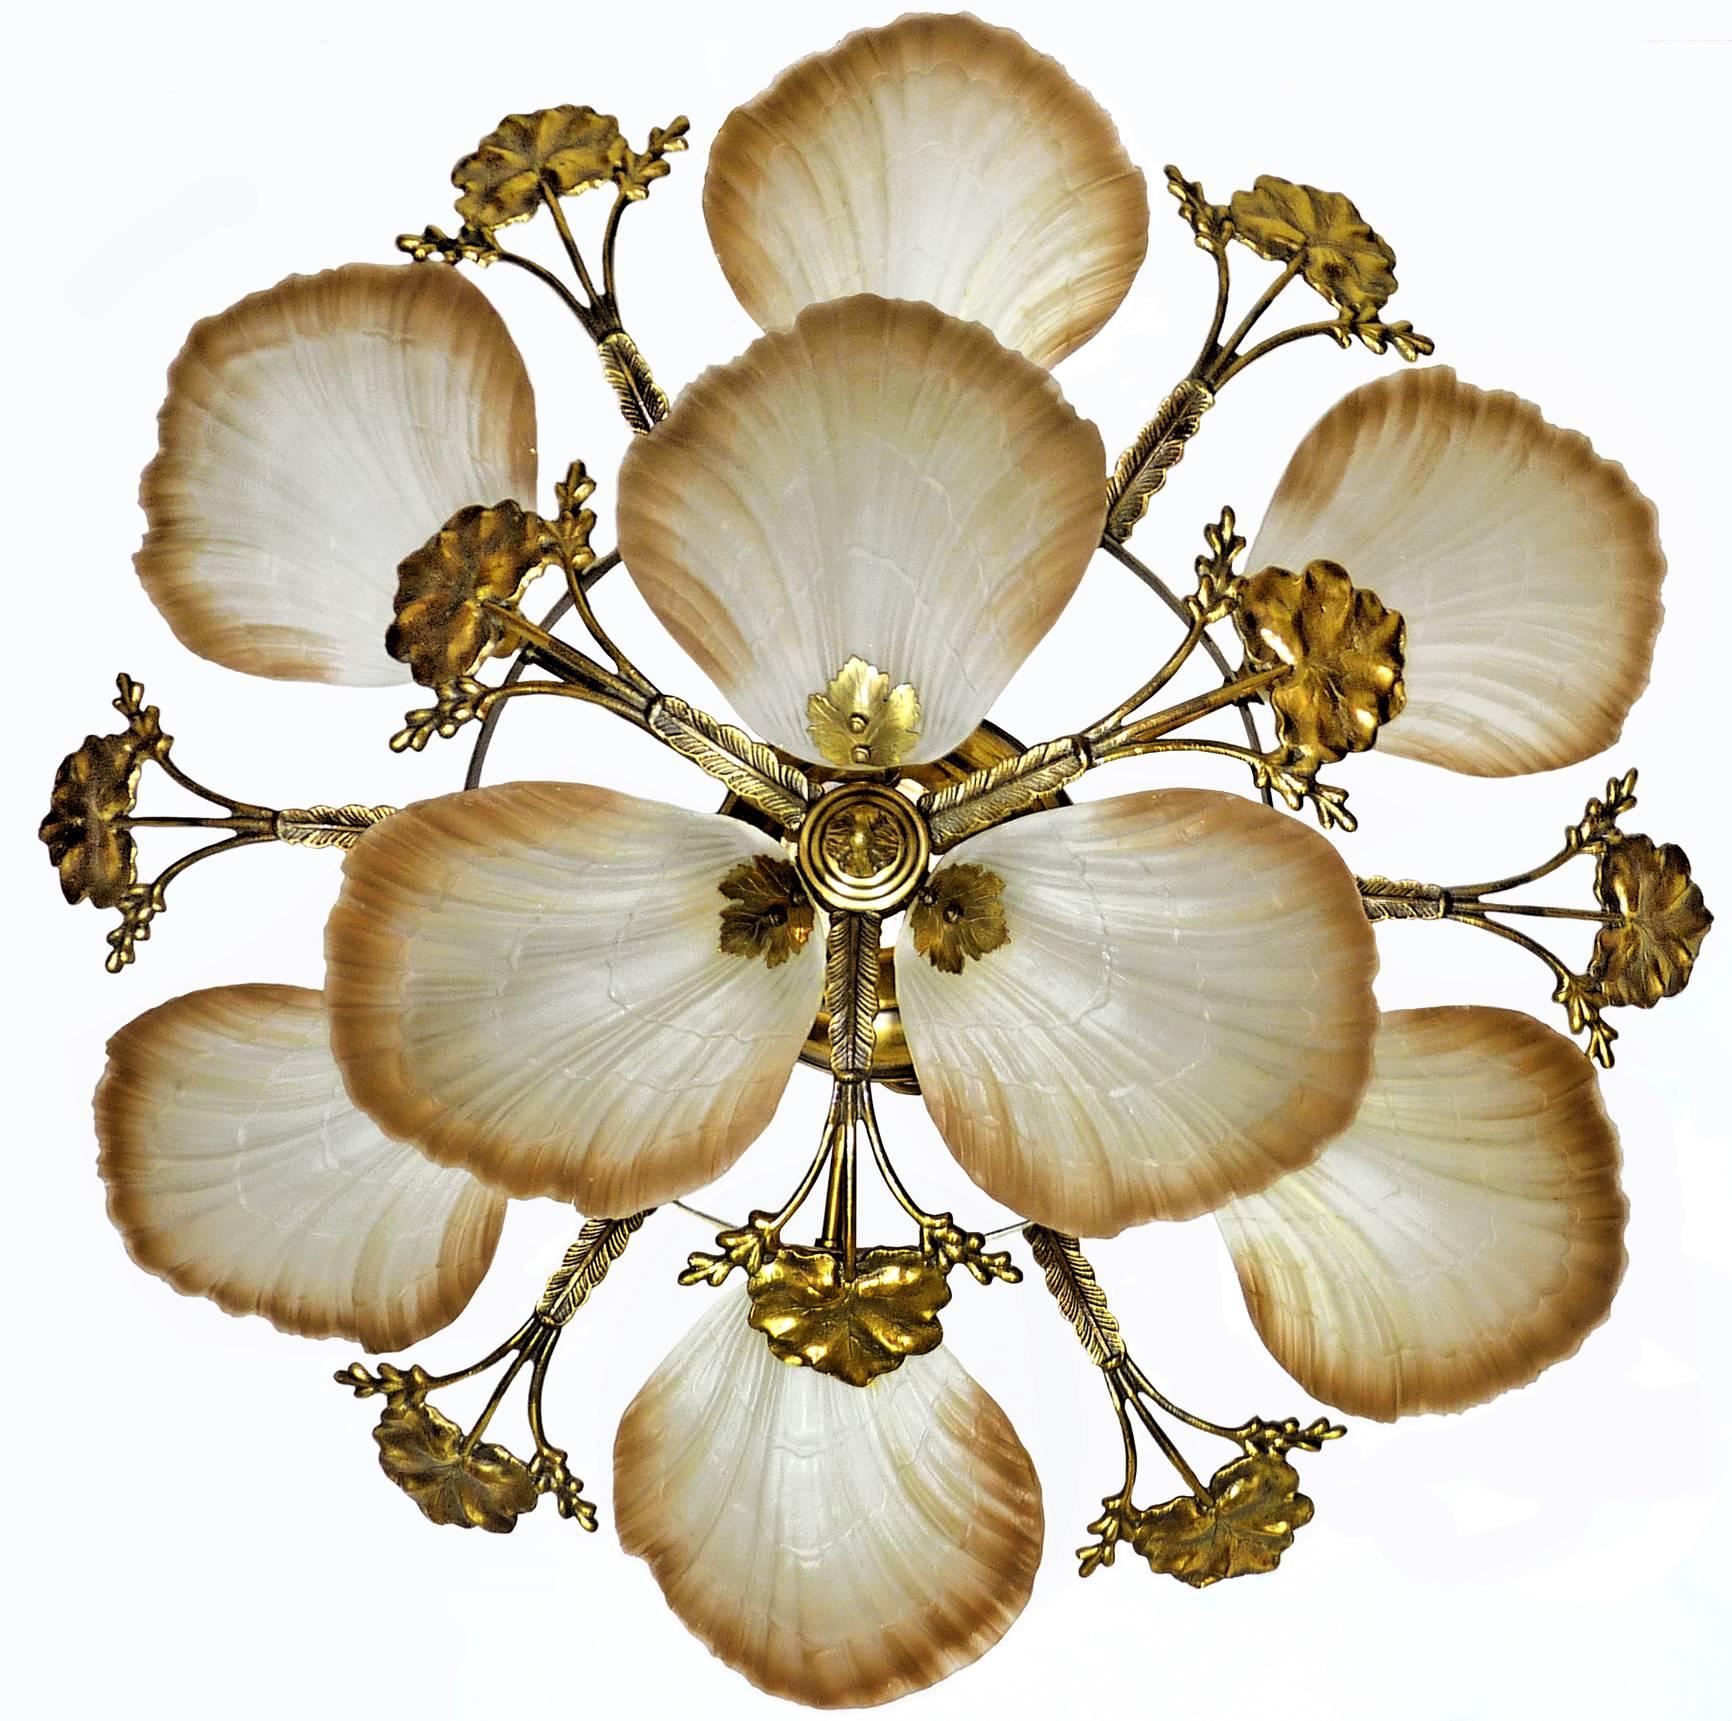 Art Nouveau style chandelier or flush mount with petal or shell shaped frosted glass and leaf design brass
Measures:
Diameter 80 cm
Height 30 cm
Weight 12 Kg / 28 lb
Nine-light bulbs E14 good working condition
Assembly required. 
 